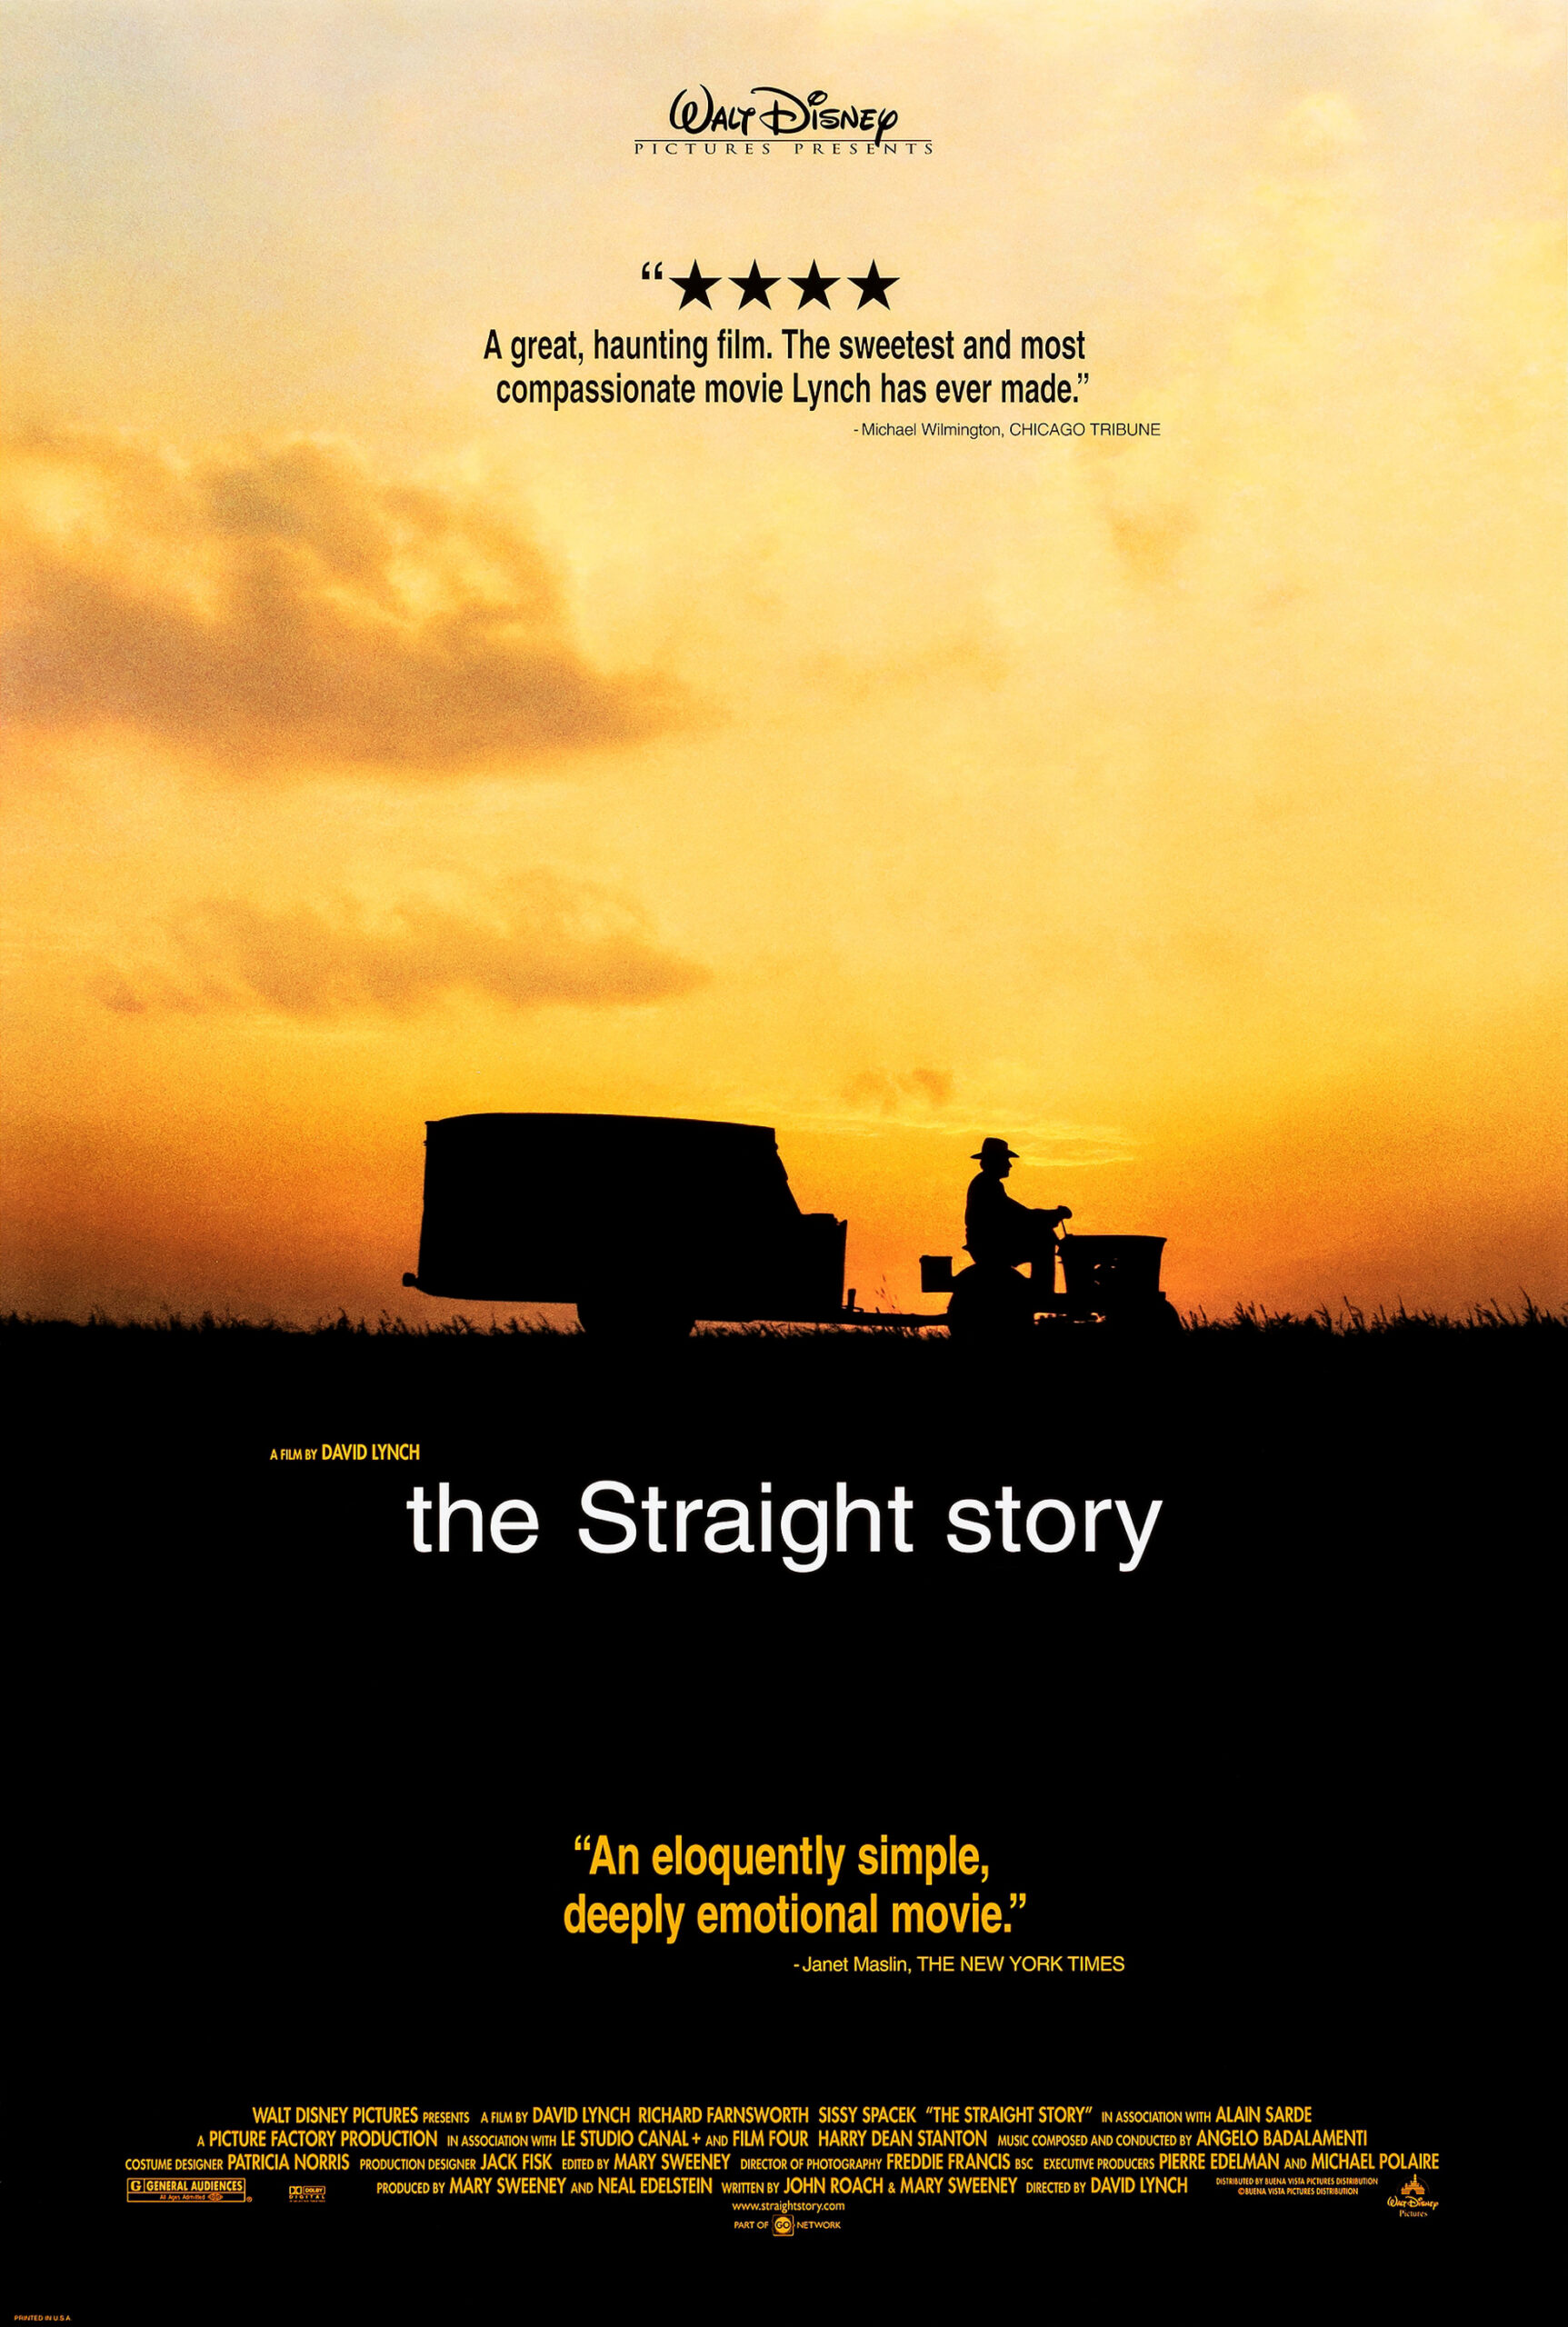 The Straight Story (1999) ★★★★☆